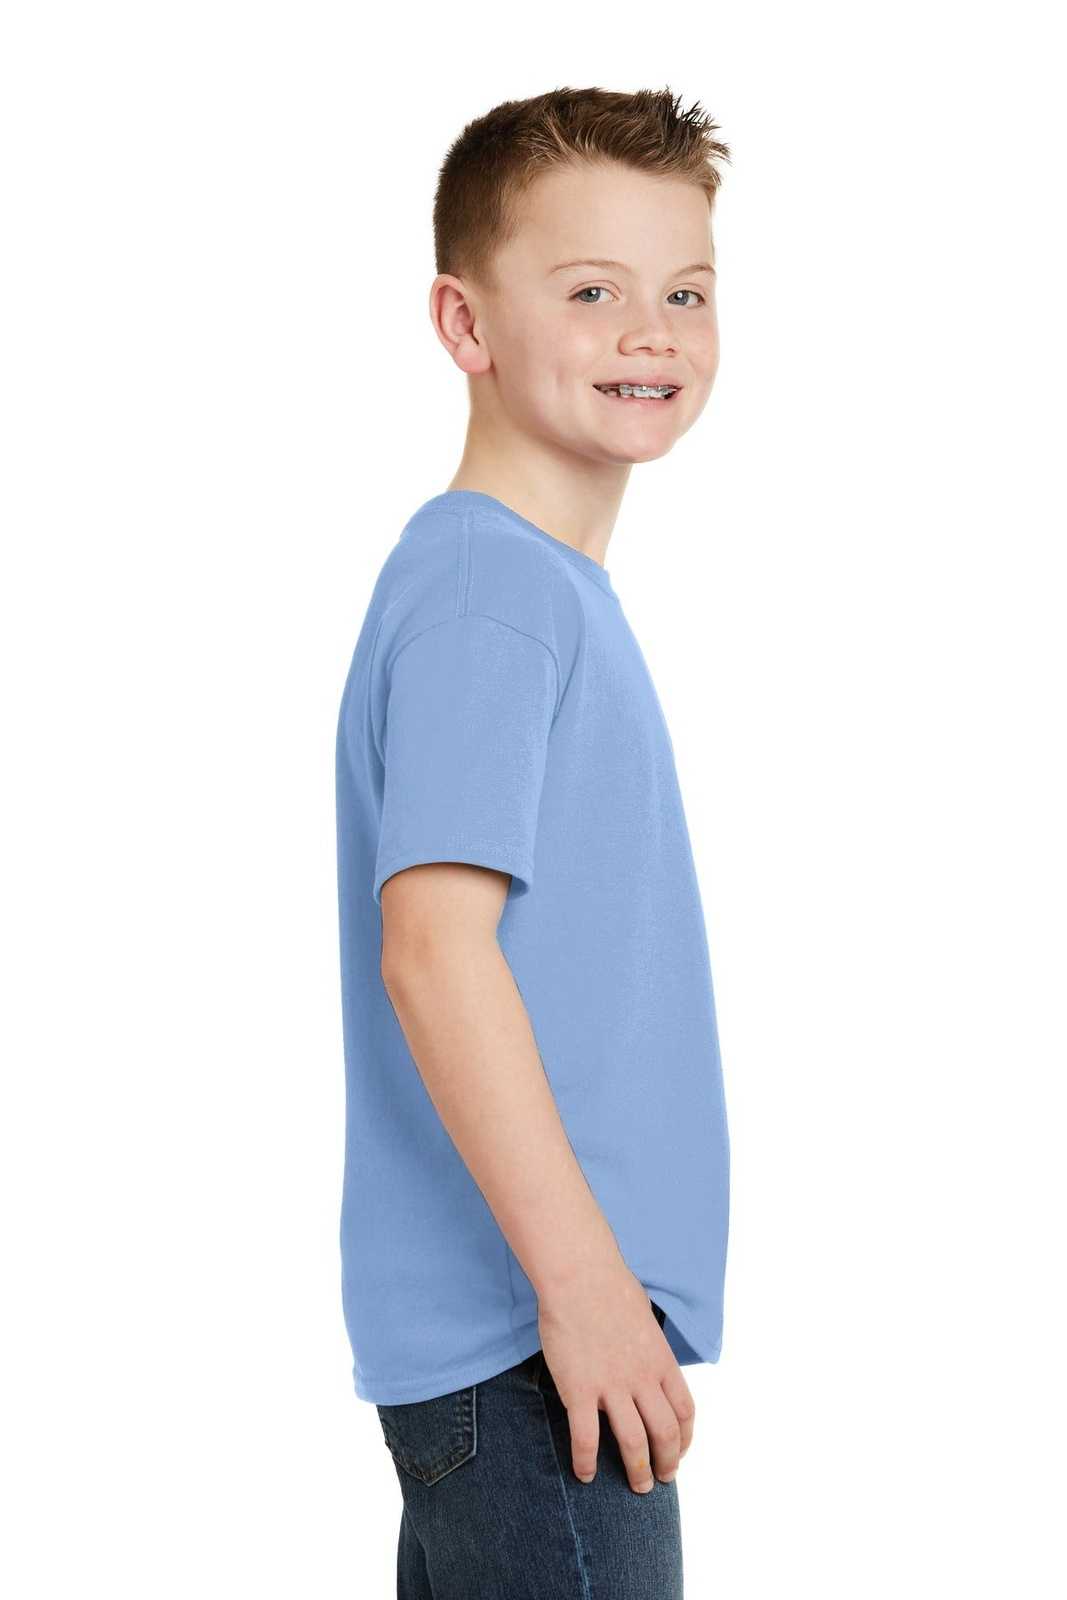 Hanes 5370 Youth Ecosmart 50/50 Cotton/Poly T-Shirt - Light Blue - HIT a Double